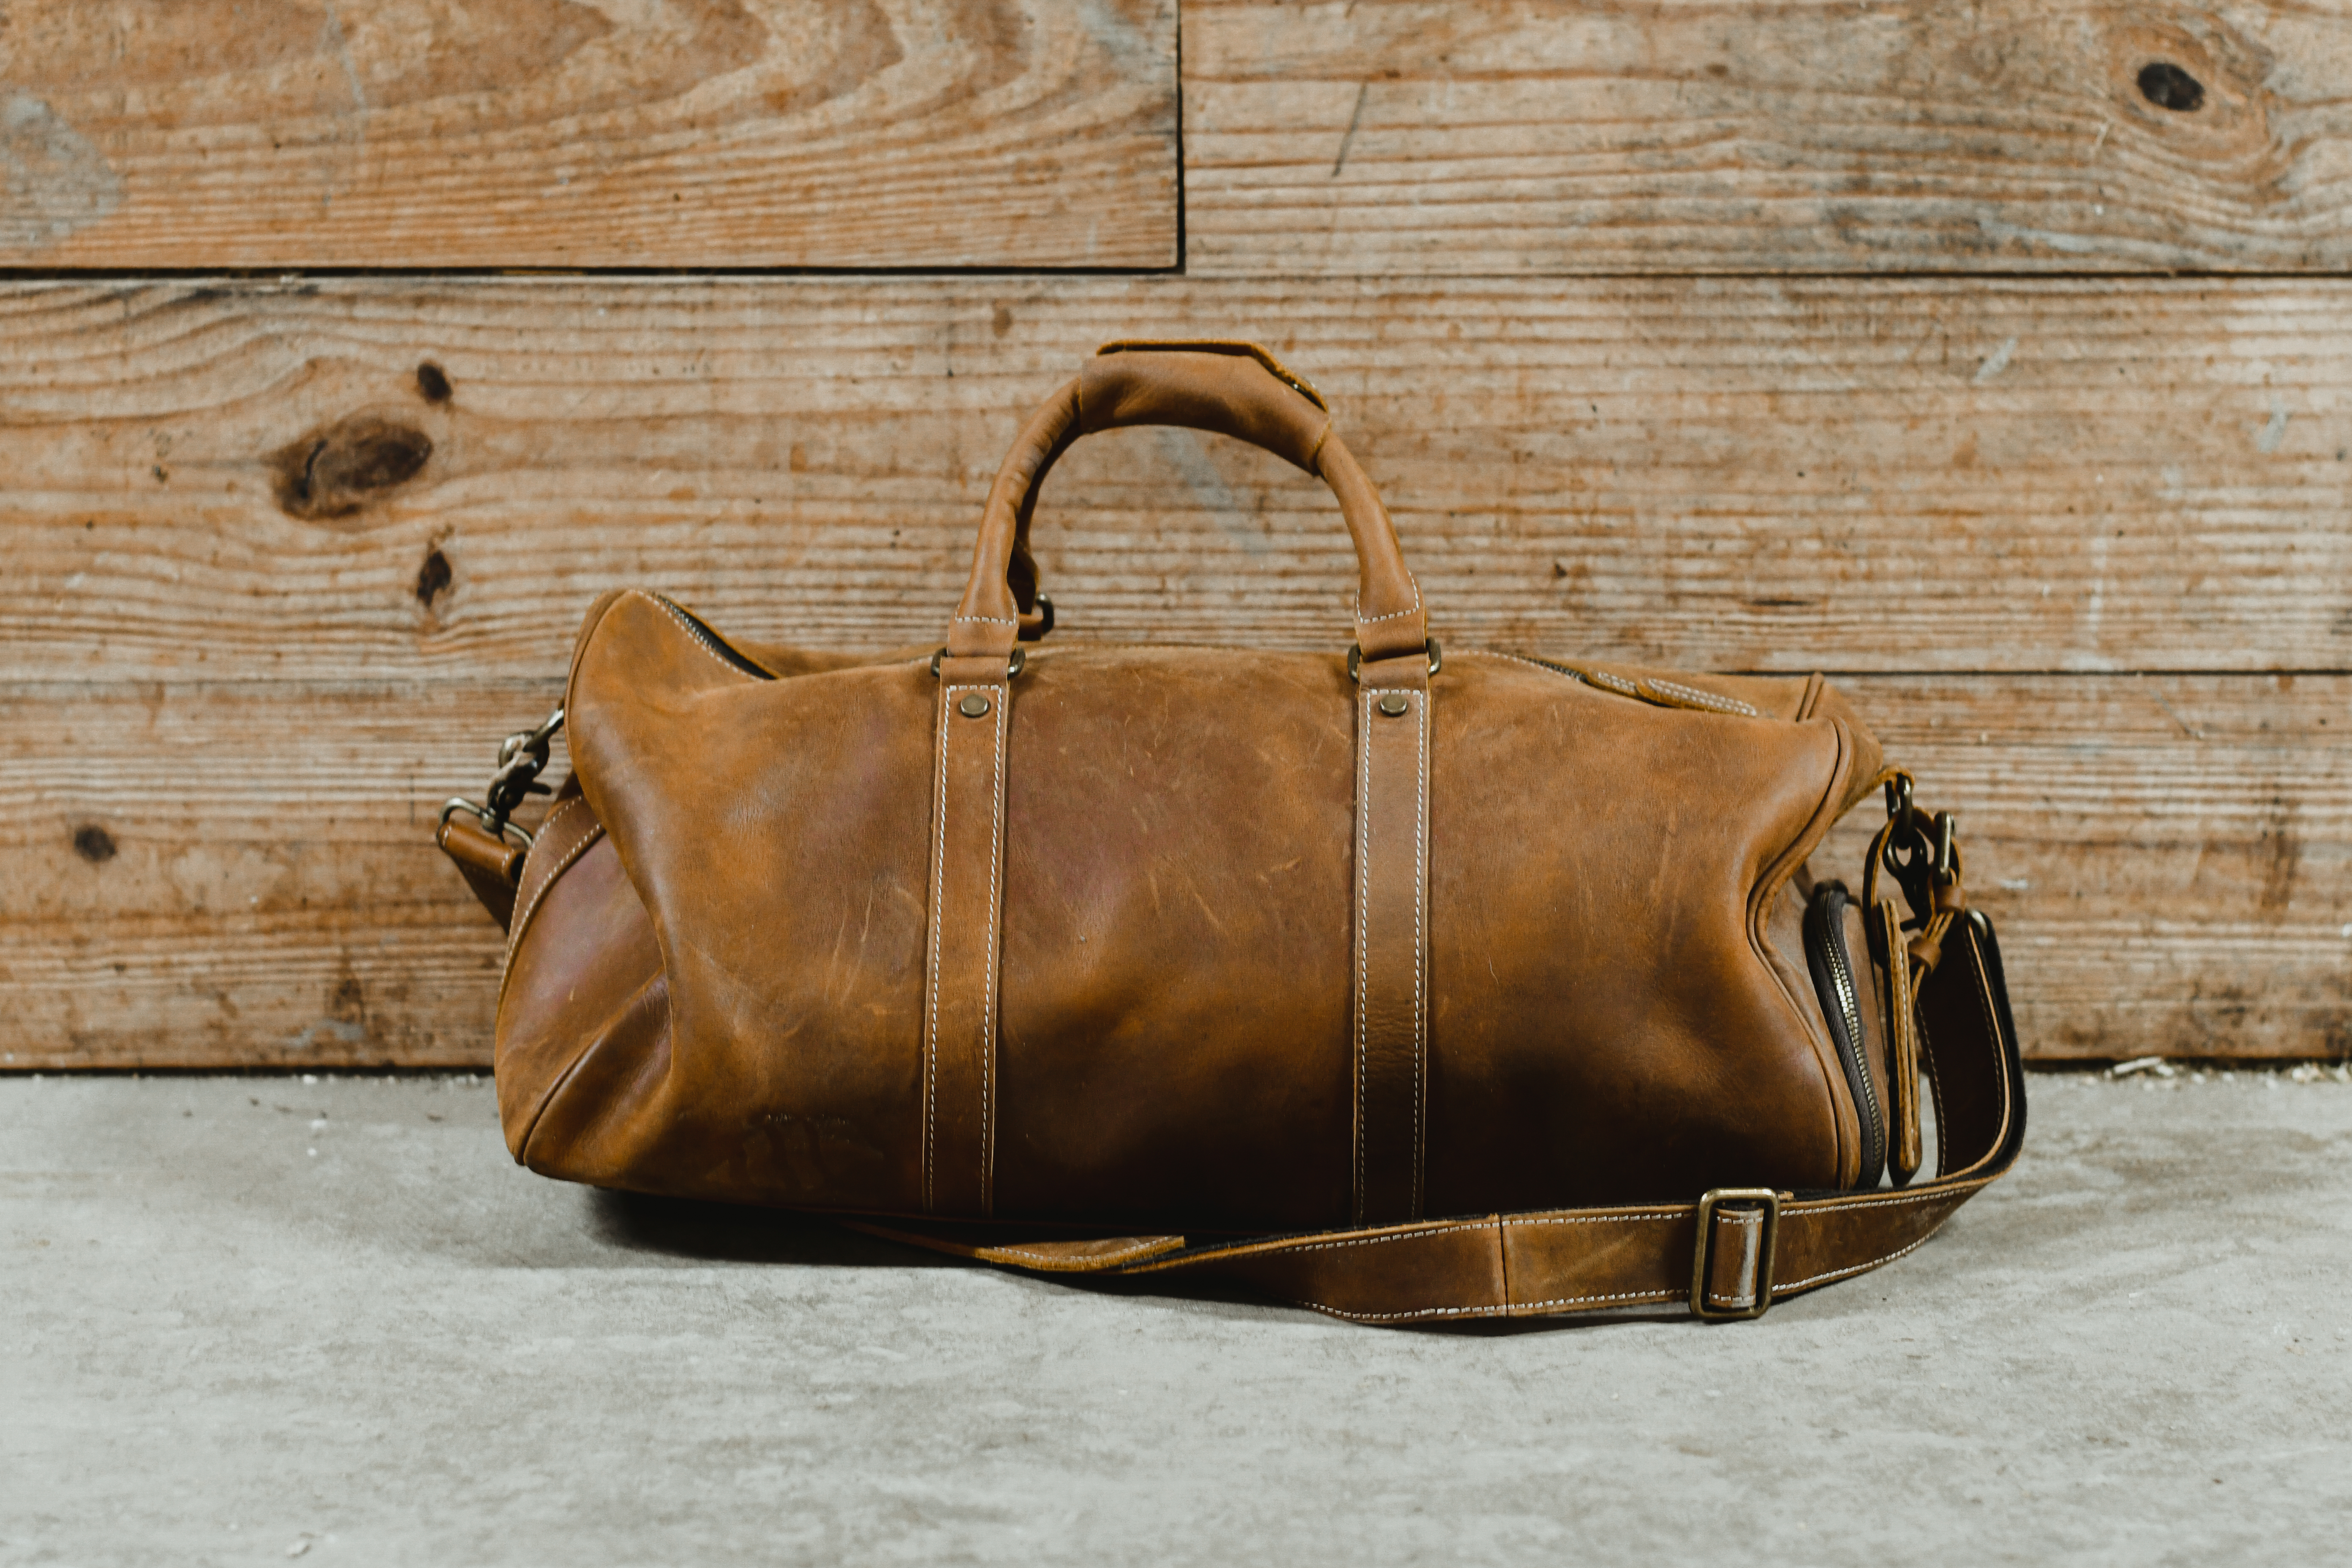 Leather Duffel Bag Care and Maintenance 101: How to Clean, Store, and